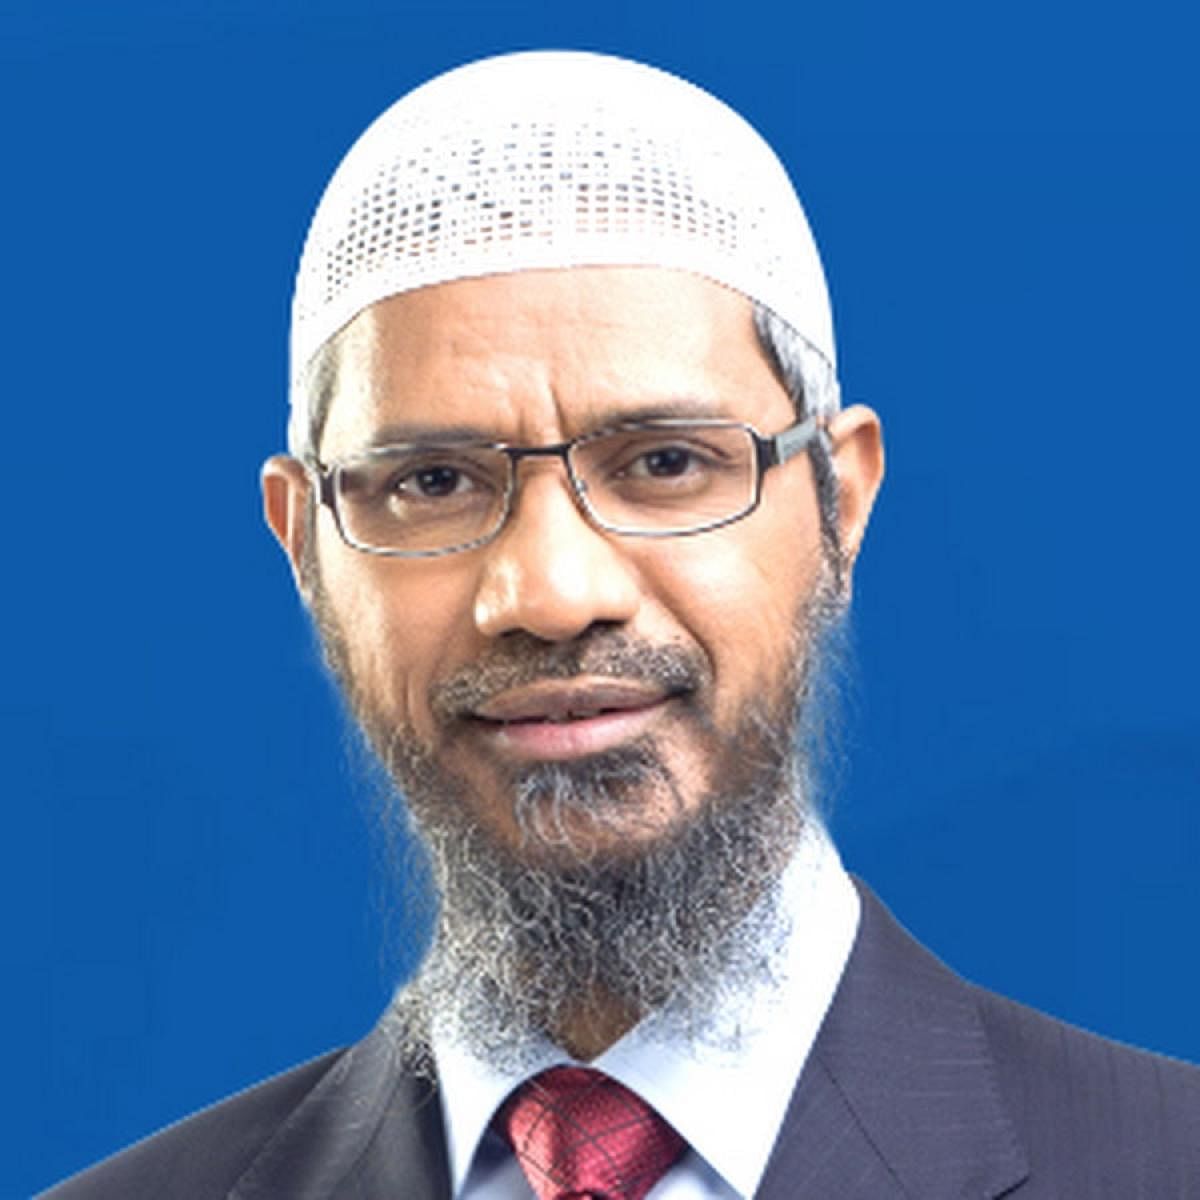 Zakir Naik has been facing charges against him in India for inciting extremism by his speeches and alleged money laundering, since 2016. (DH photo)